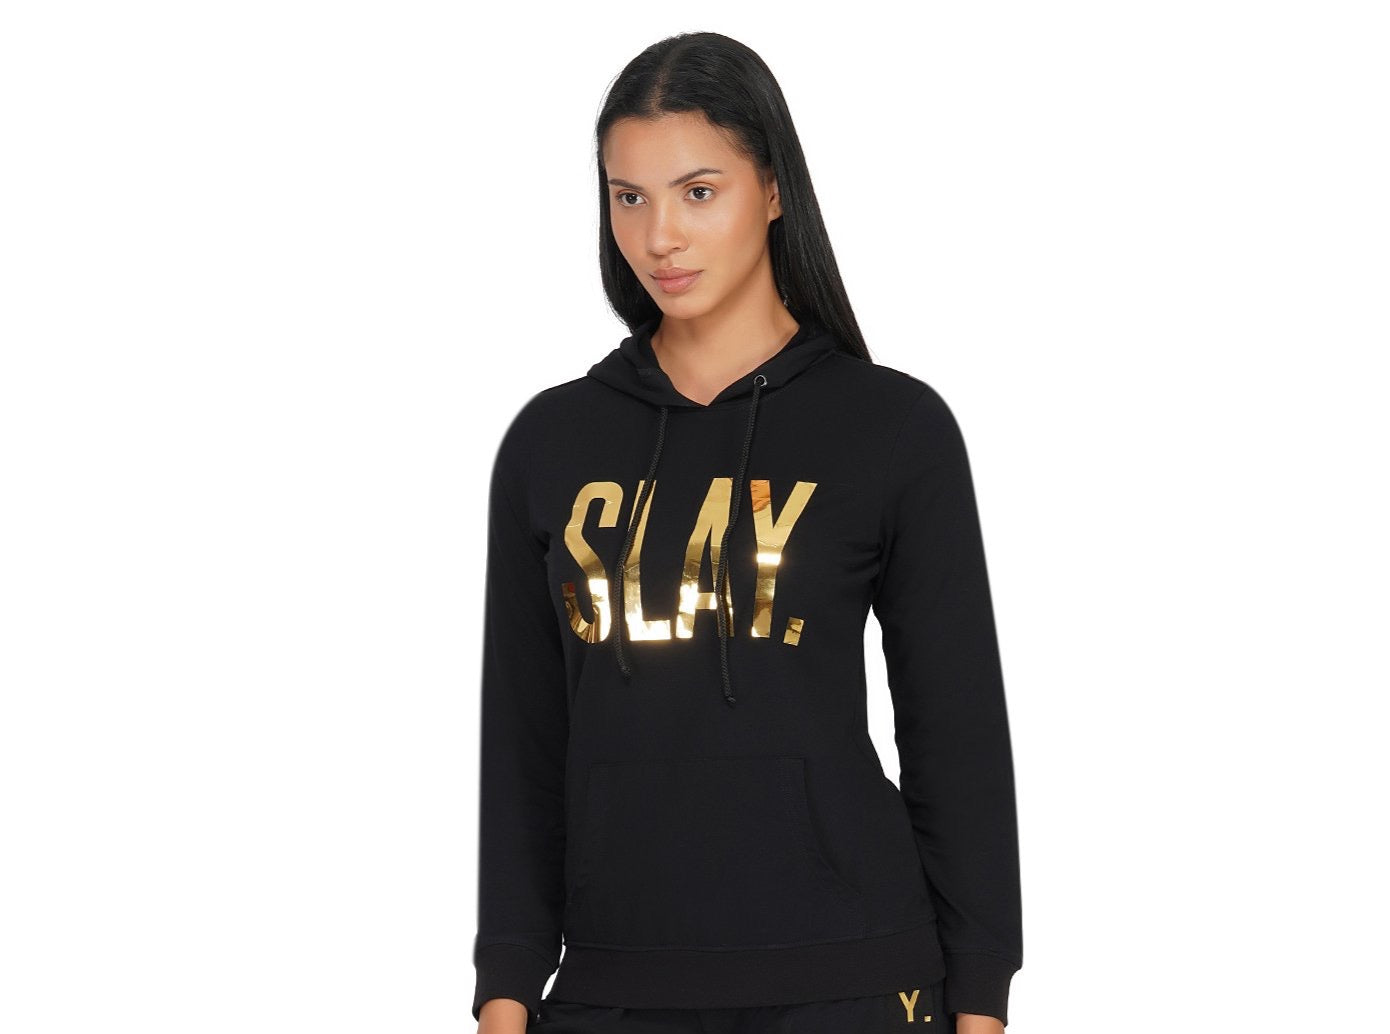 SLAY. Classic Women's Limited Edition Gold Mirror Foil Print Black Hoodie-clothing-to-slay.myshopify.com-Tracksuit